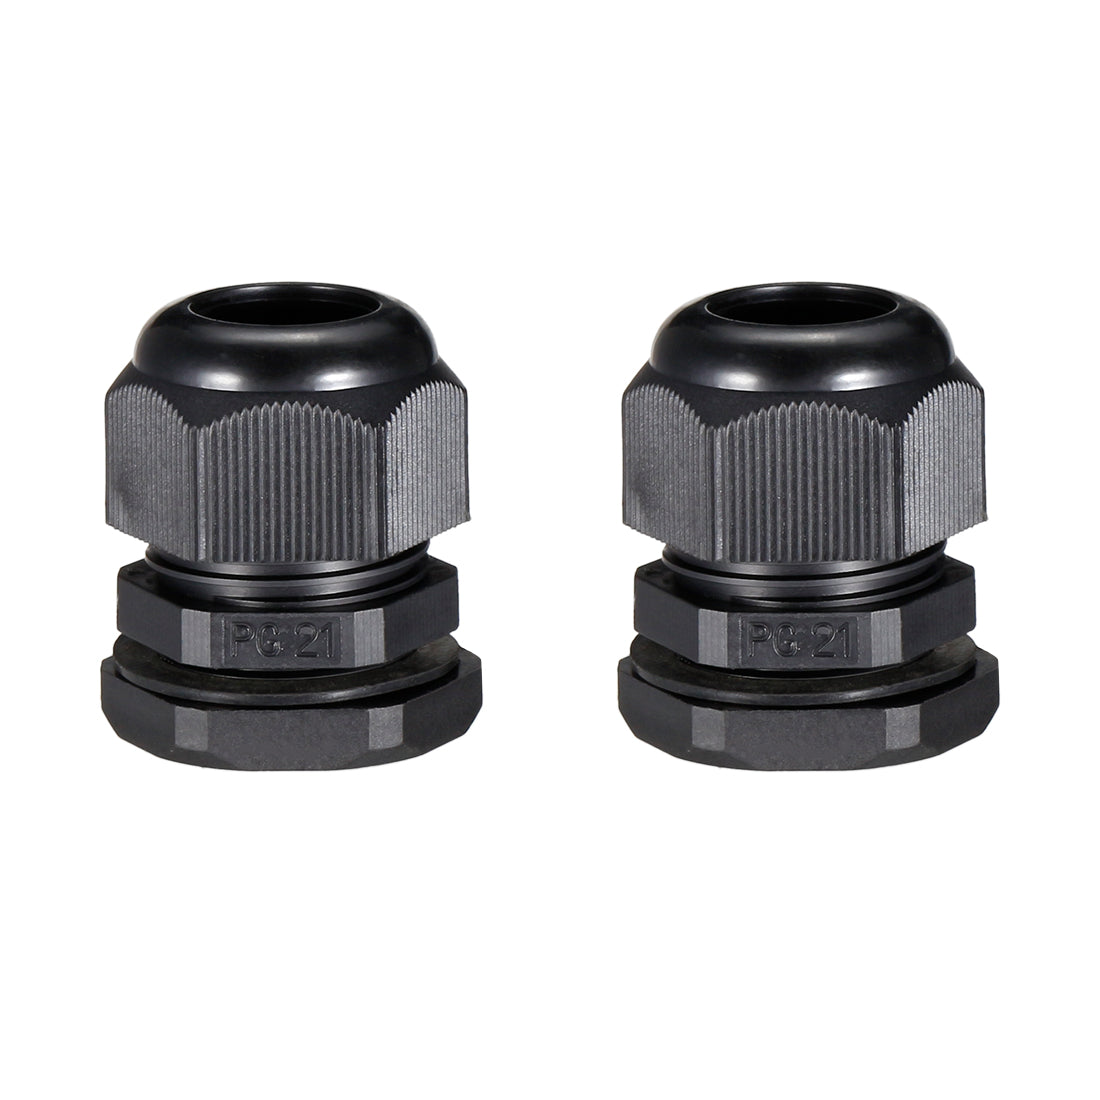 uxcell Uxcell PG21 Cable Gland Waterproof Plastic Joint Adjustable Locknut Black for 12mm-18mm Dia Cable Wire 2 Pcs